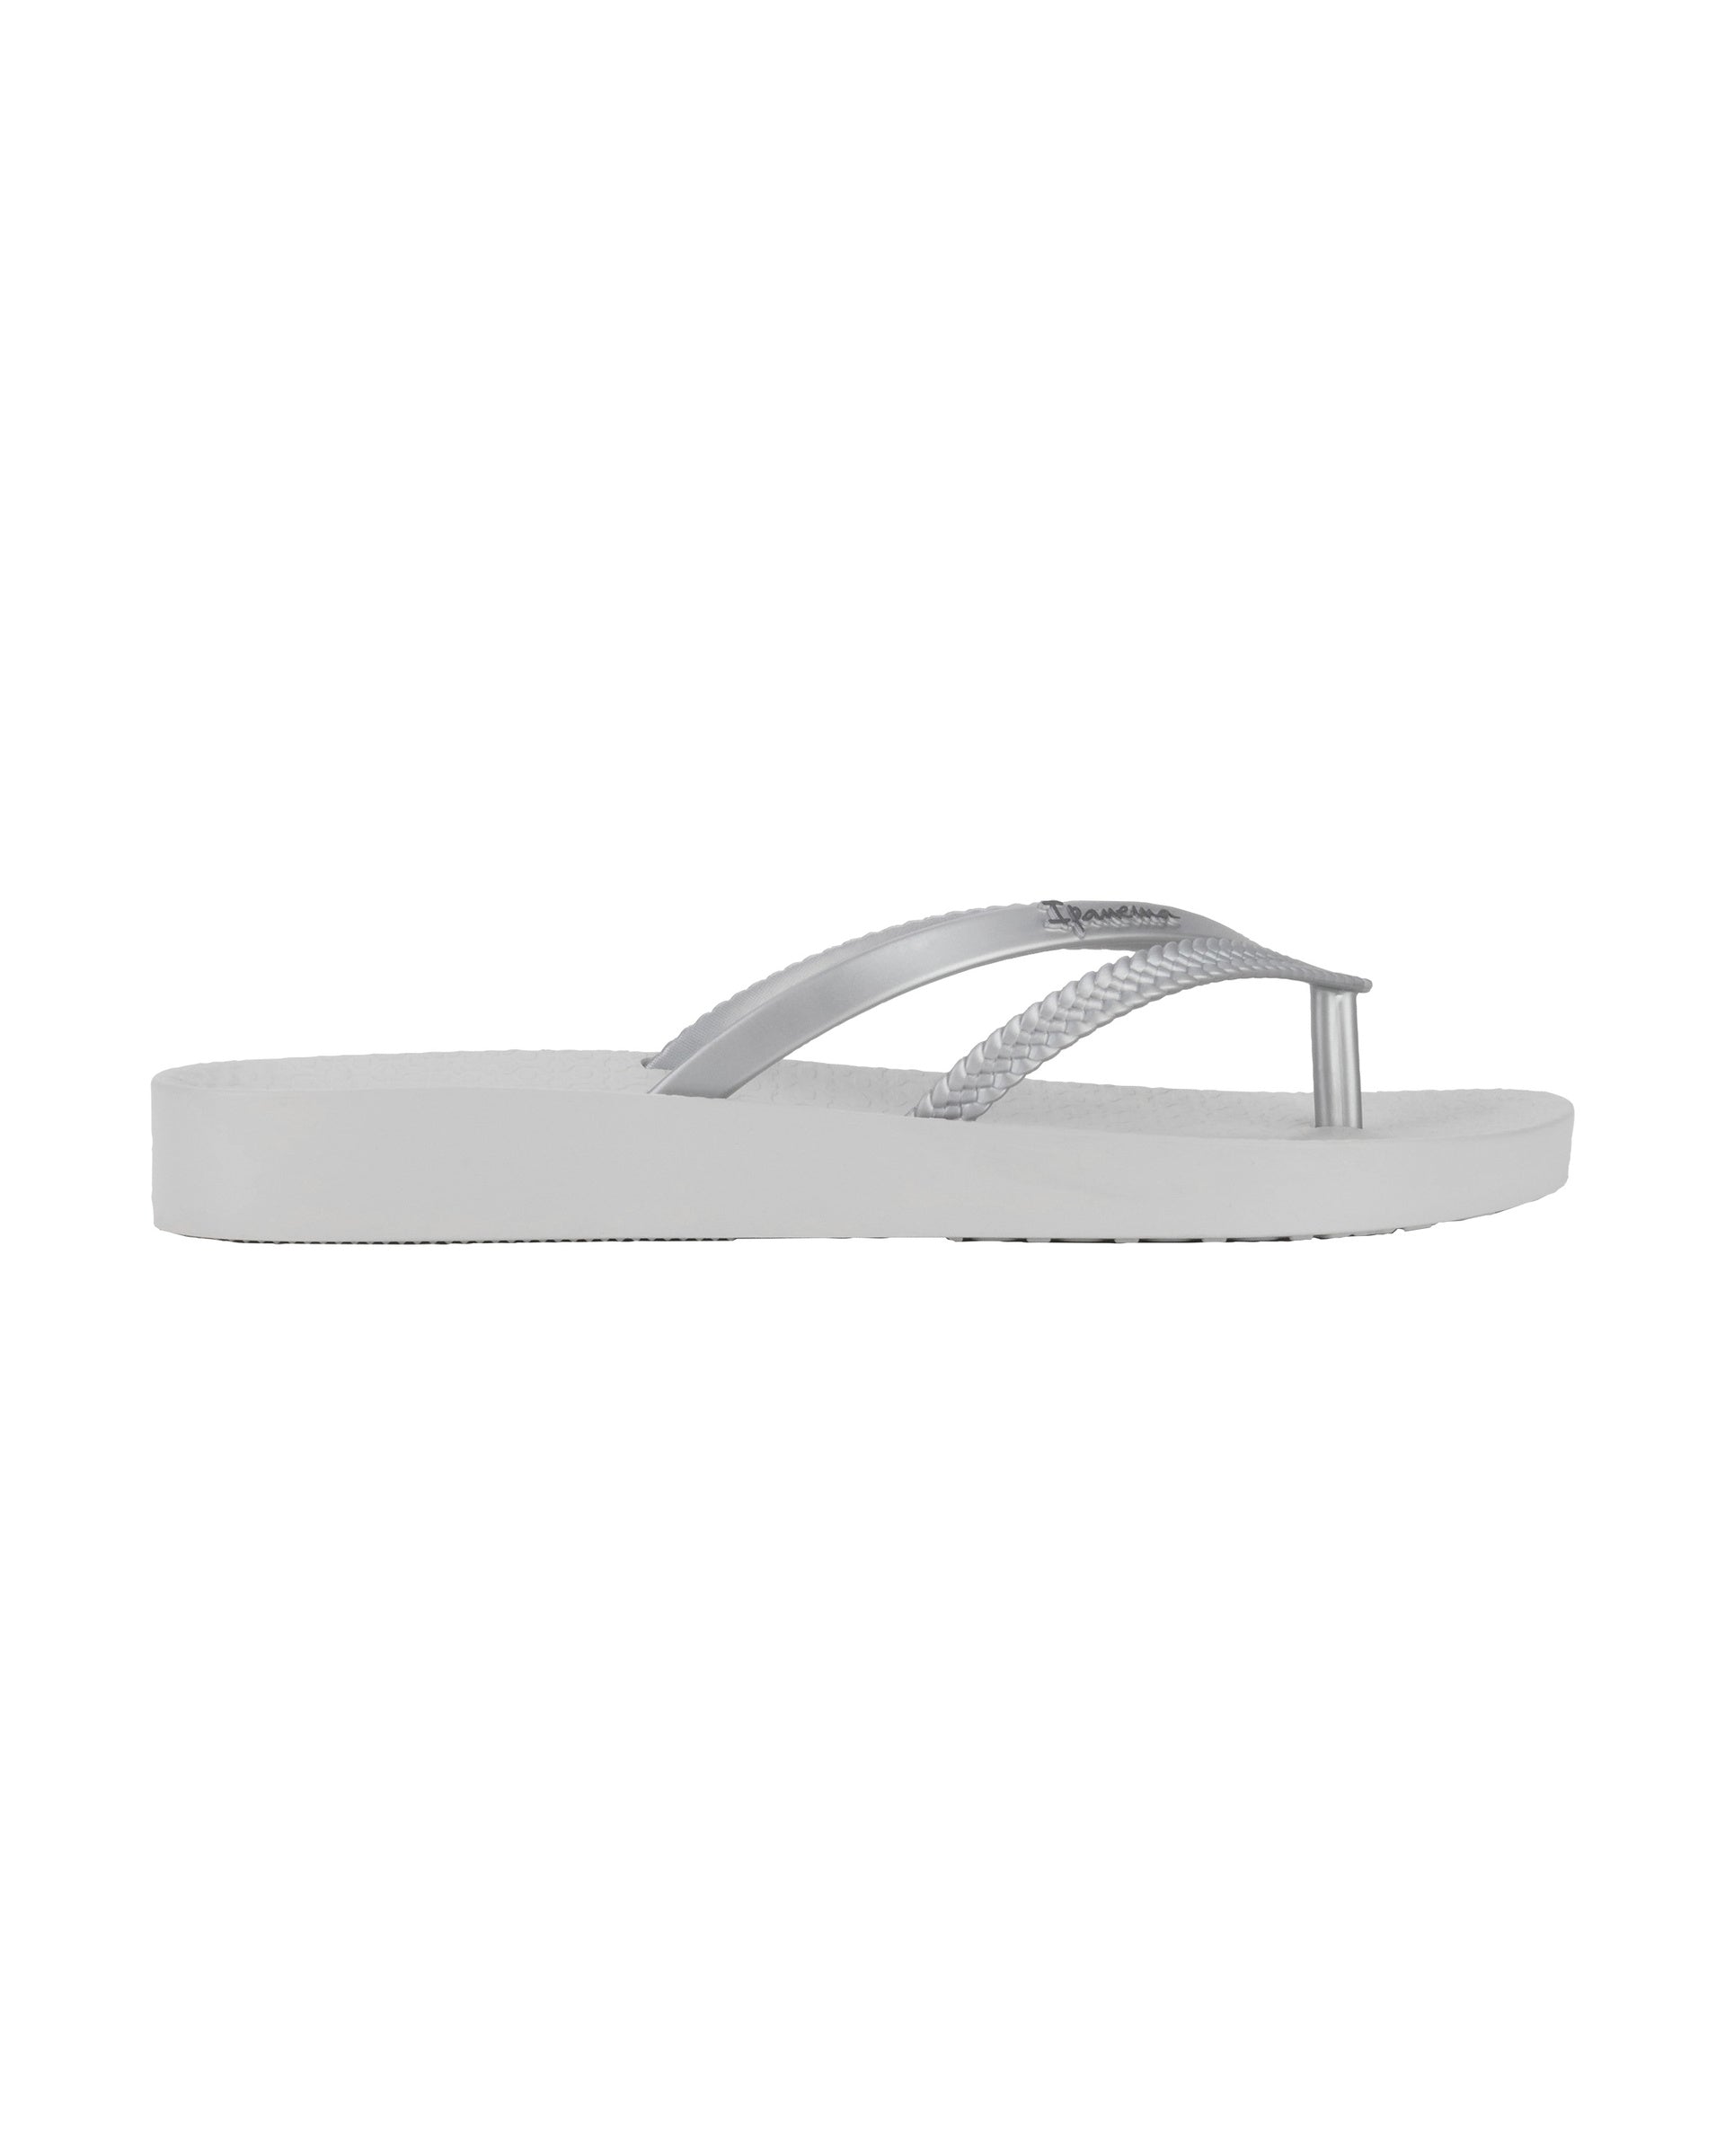 Outer side view of a grey Ipanema Bossa Soft women's flip flop with metallic grey straps.